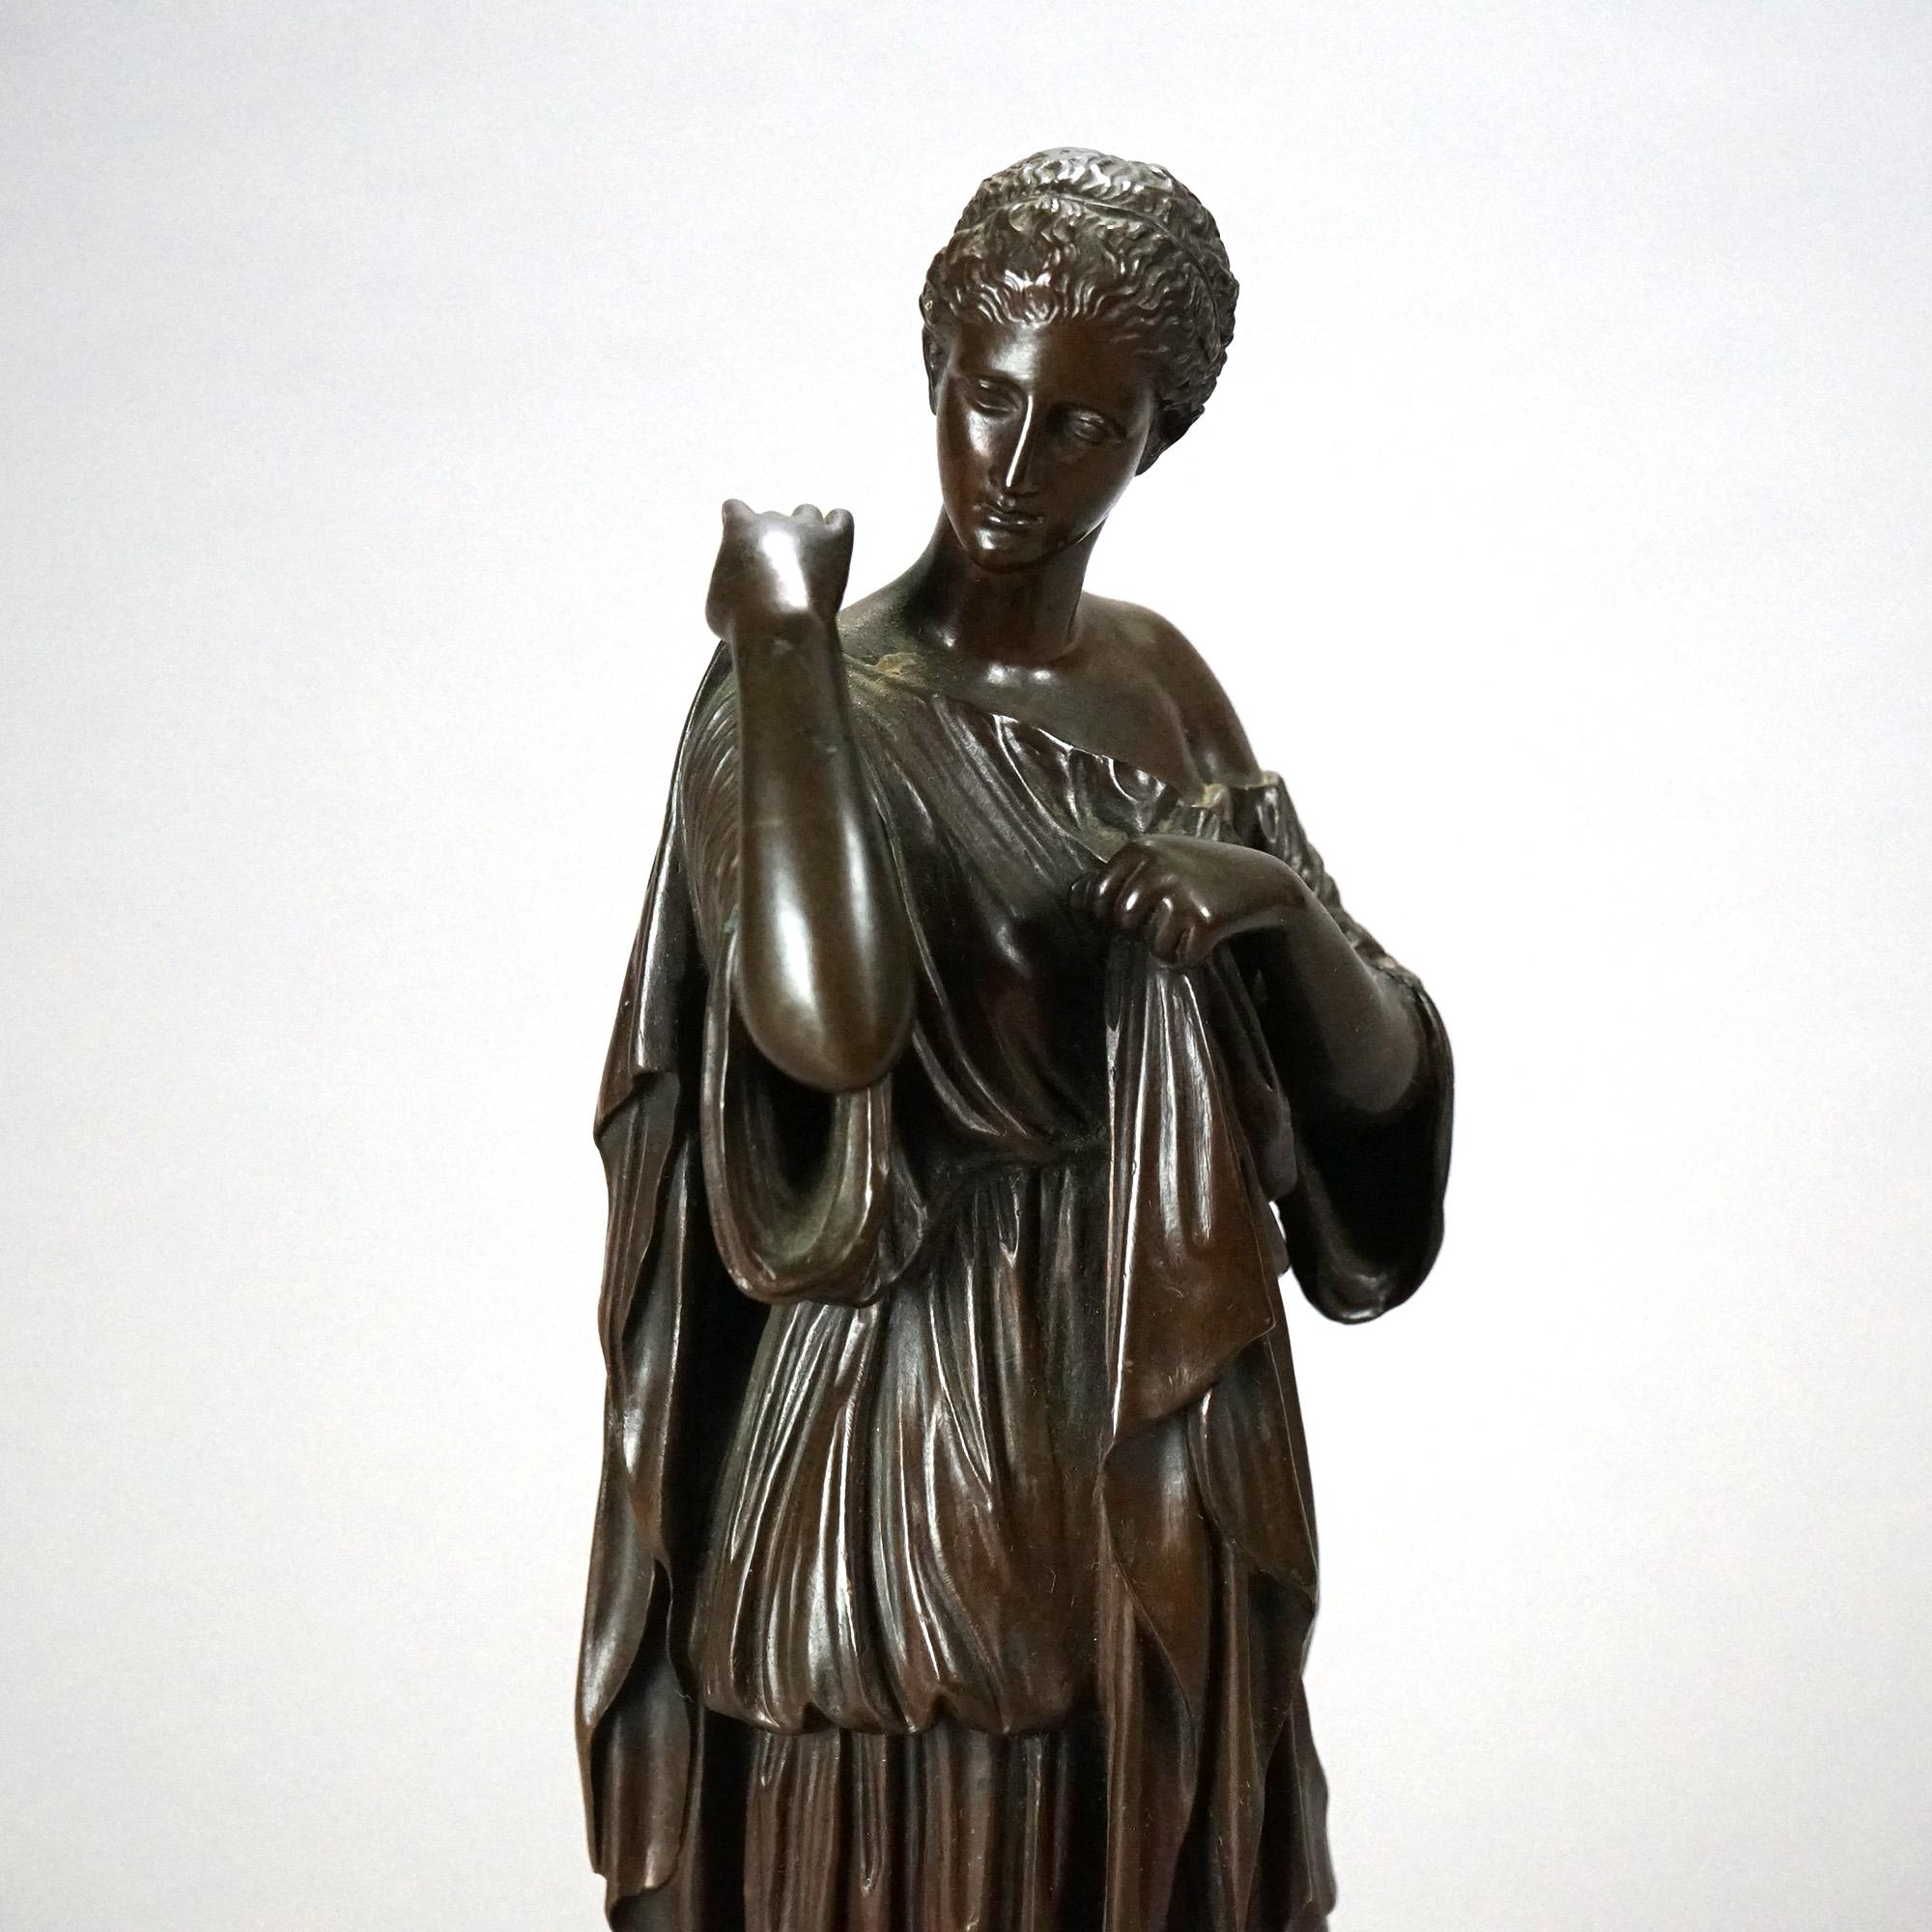 19th Century Antique French Neoclassical Bronze, Statue of a Classical Woman, Circa 1890